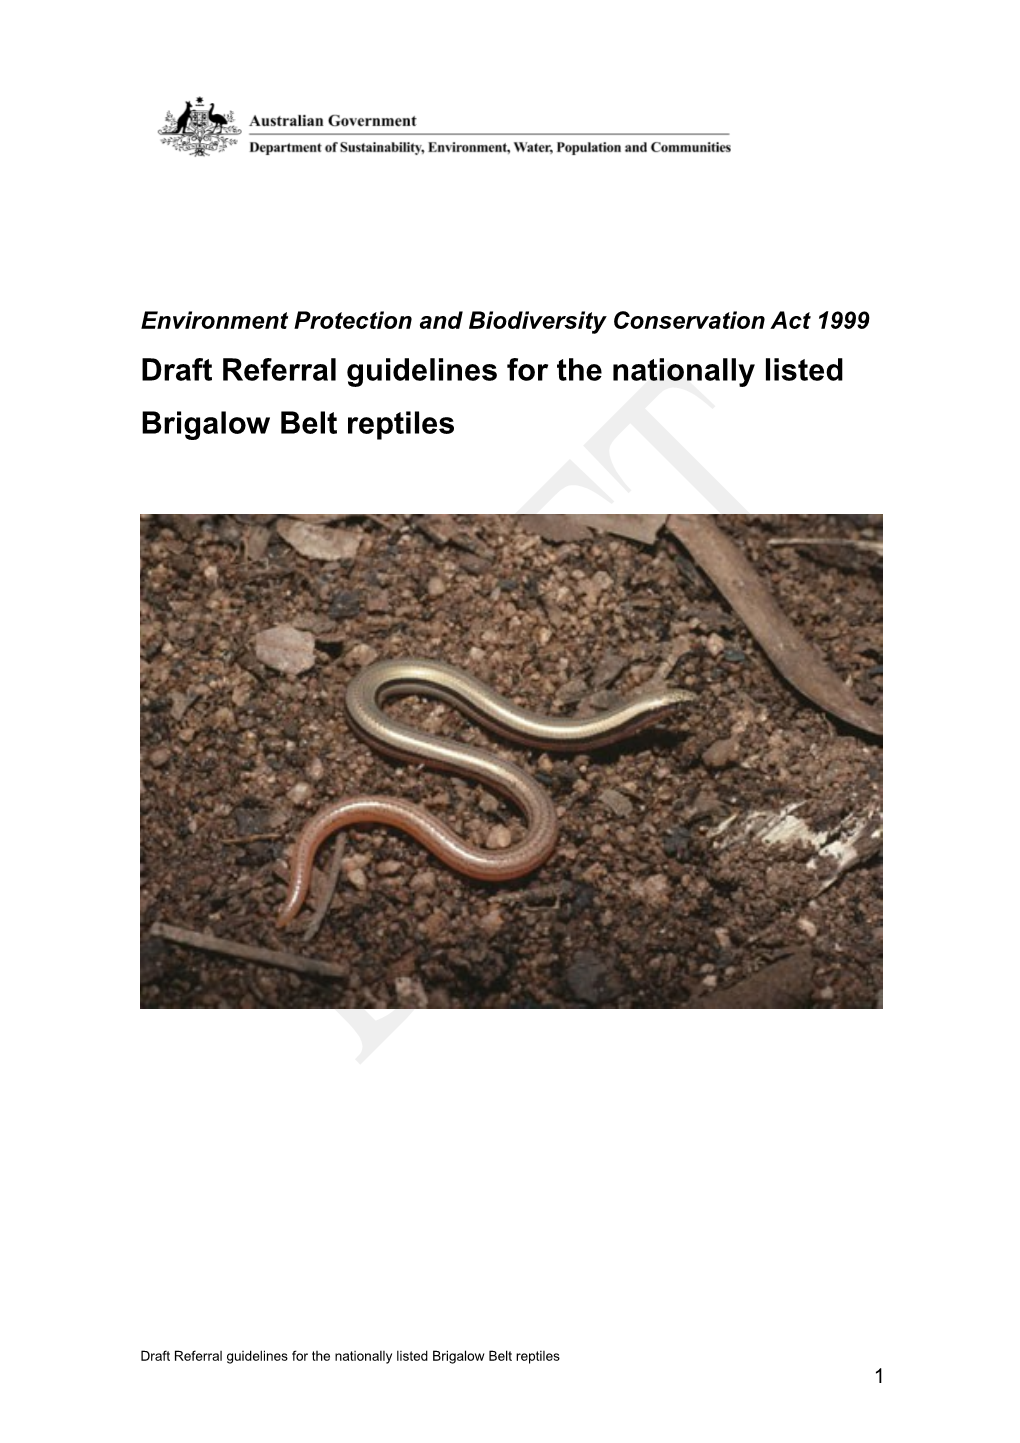 Draft Referral Guidelines for the Nationally Listed Brigalow Belt Reptiles